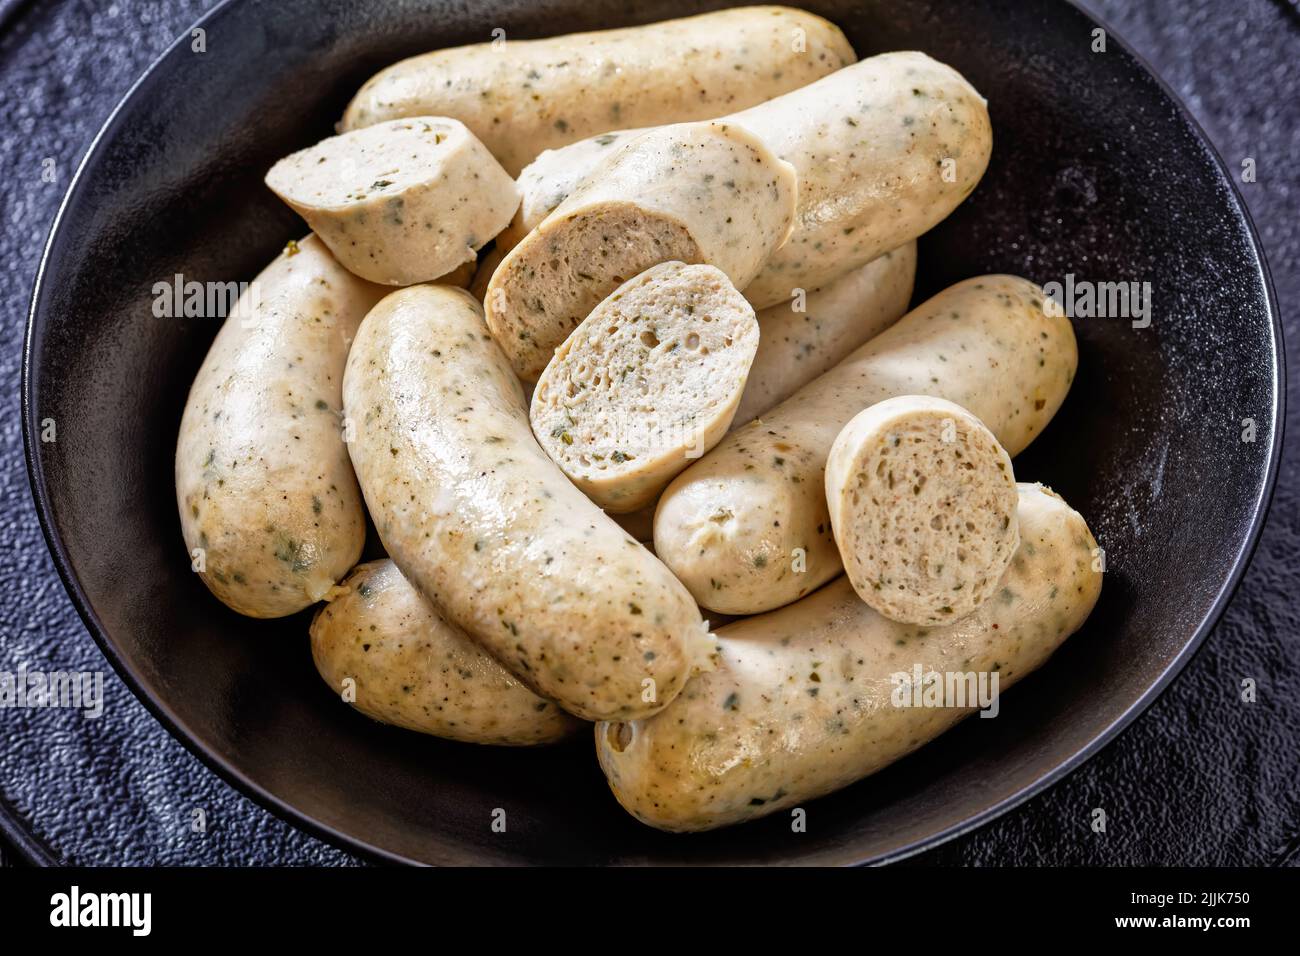 Weisswurst, bavarian white sausages of minced veal, pork back bacon, spices and parsley  in black bowl, close-up Stock Photo